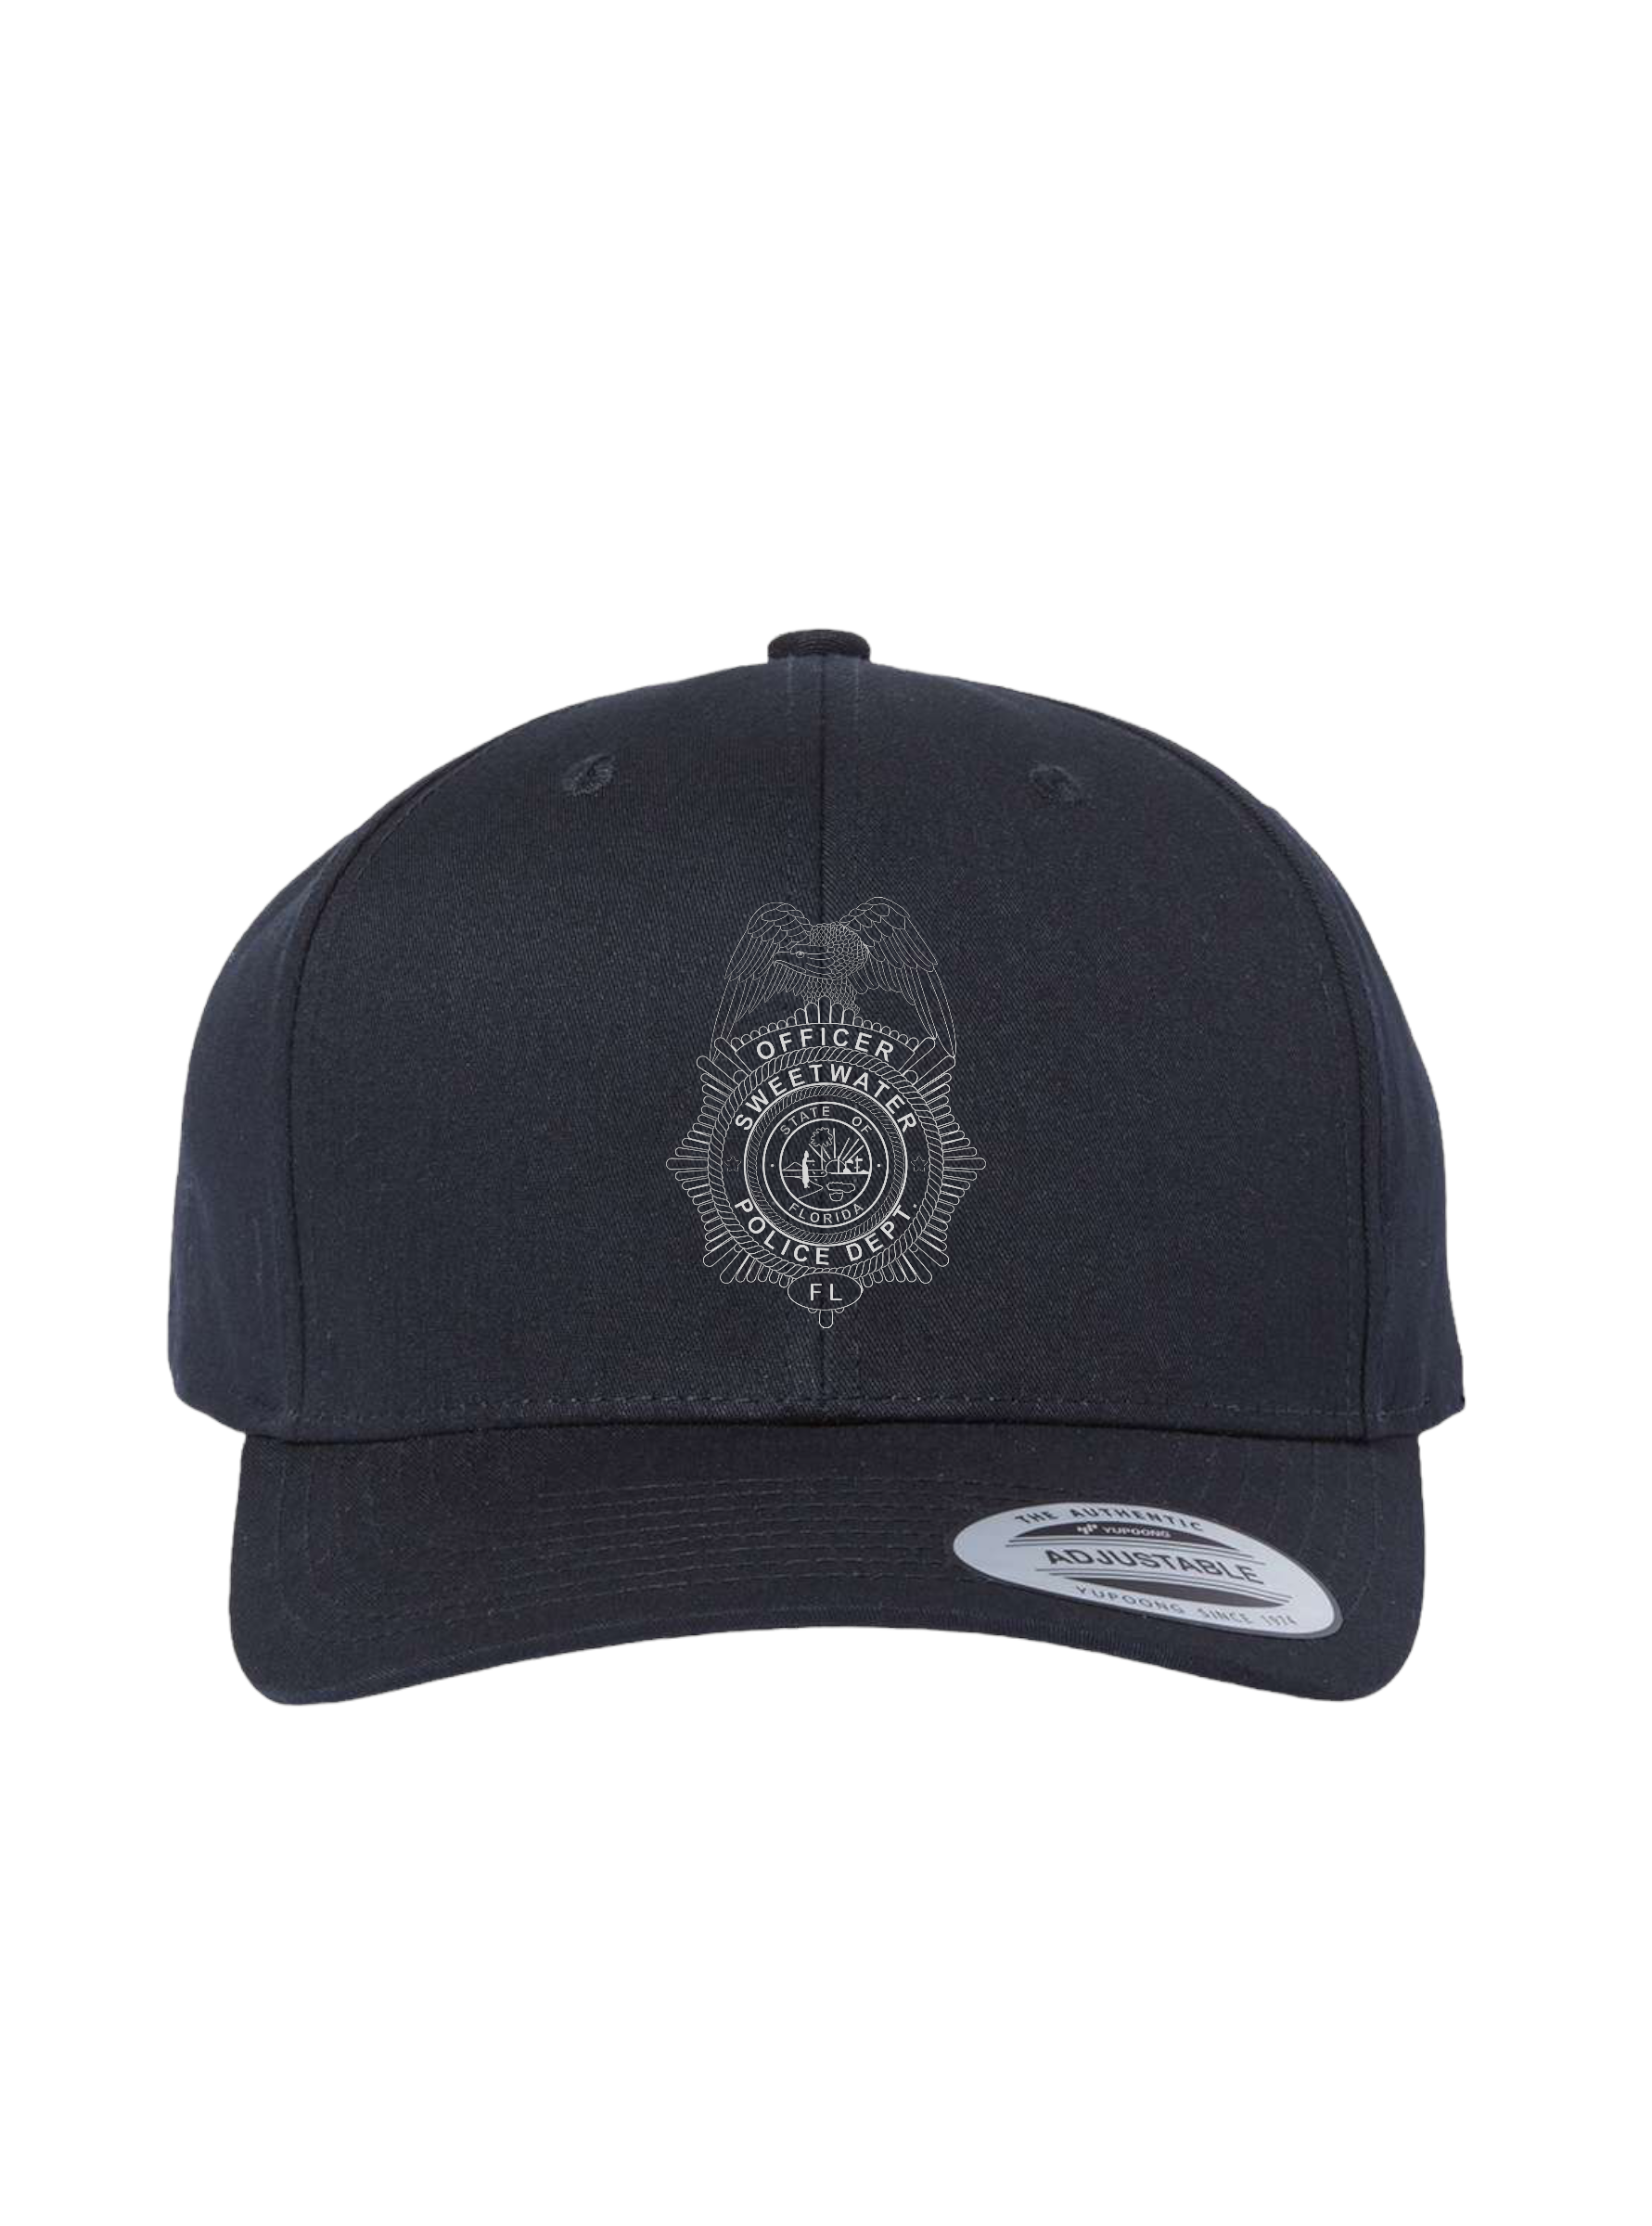 Sweetwater Police Department Snapback Cap